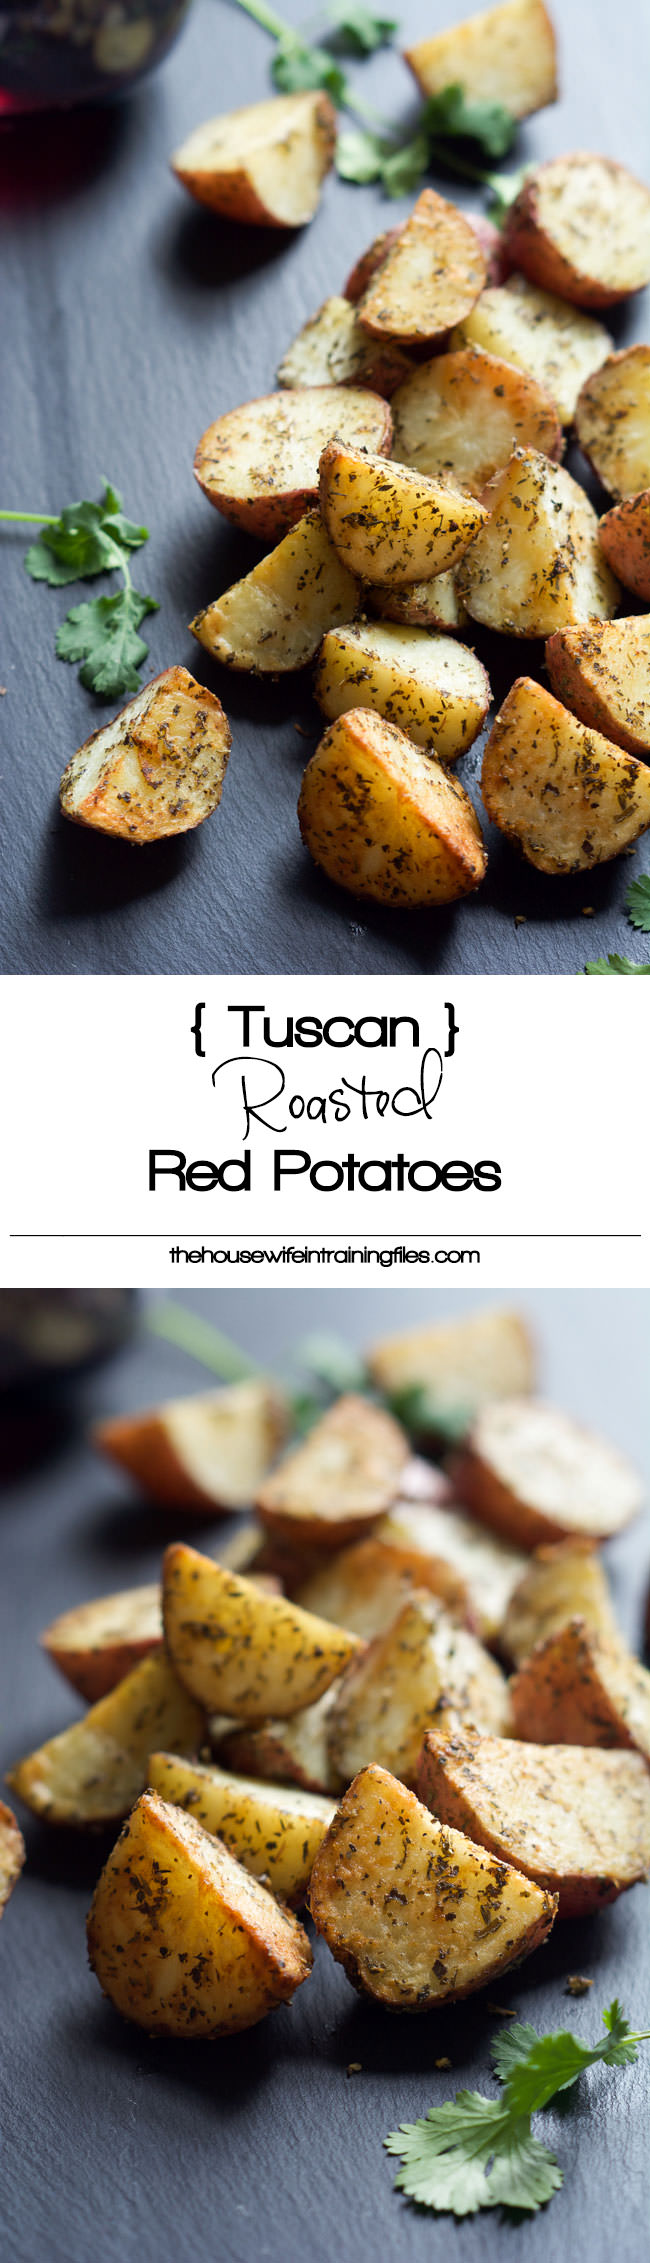 Roasted Red Potatoes Recipe: Crispy, Flavorful, and Nutritious Side Dish